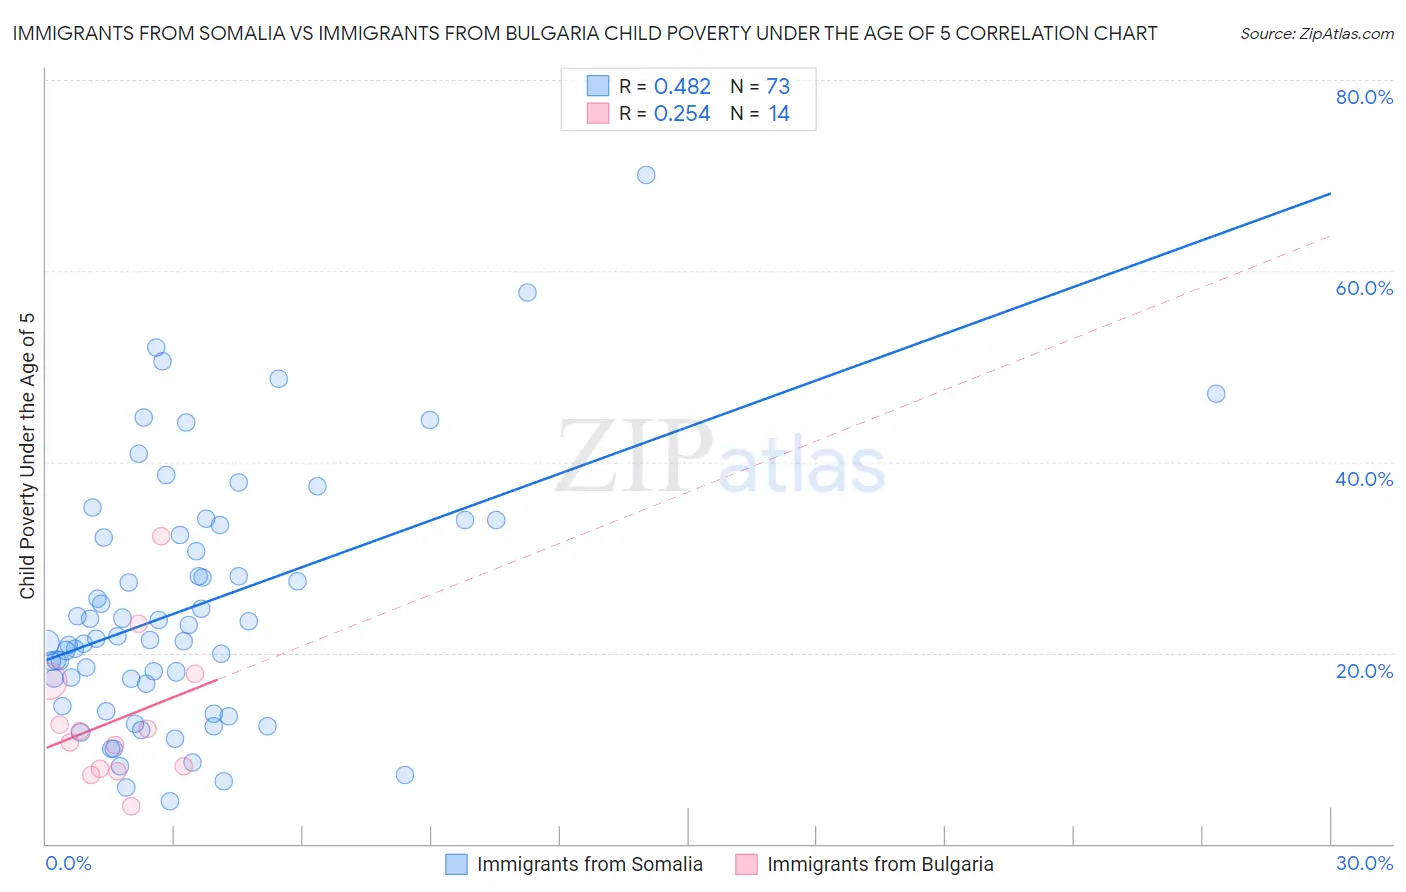 Immigrants from Somalia vs Immigrants from Bulgaria Child Poverty Under the Age of 5